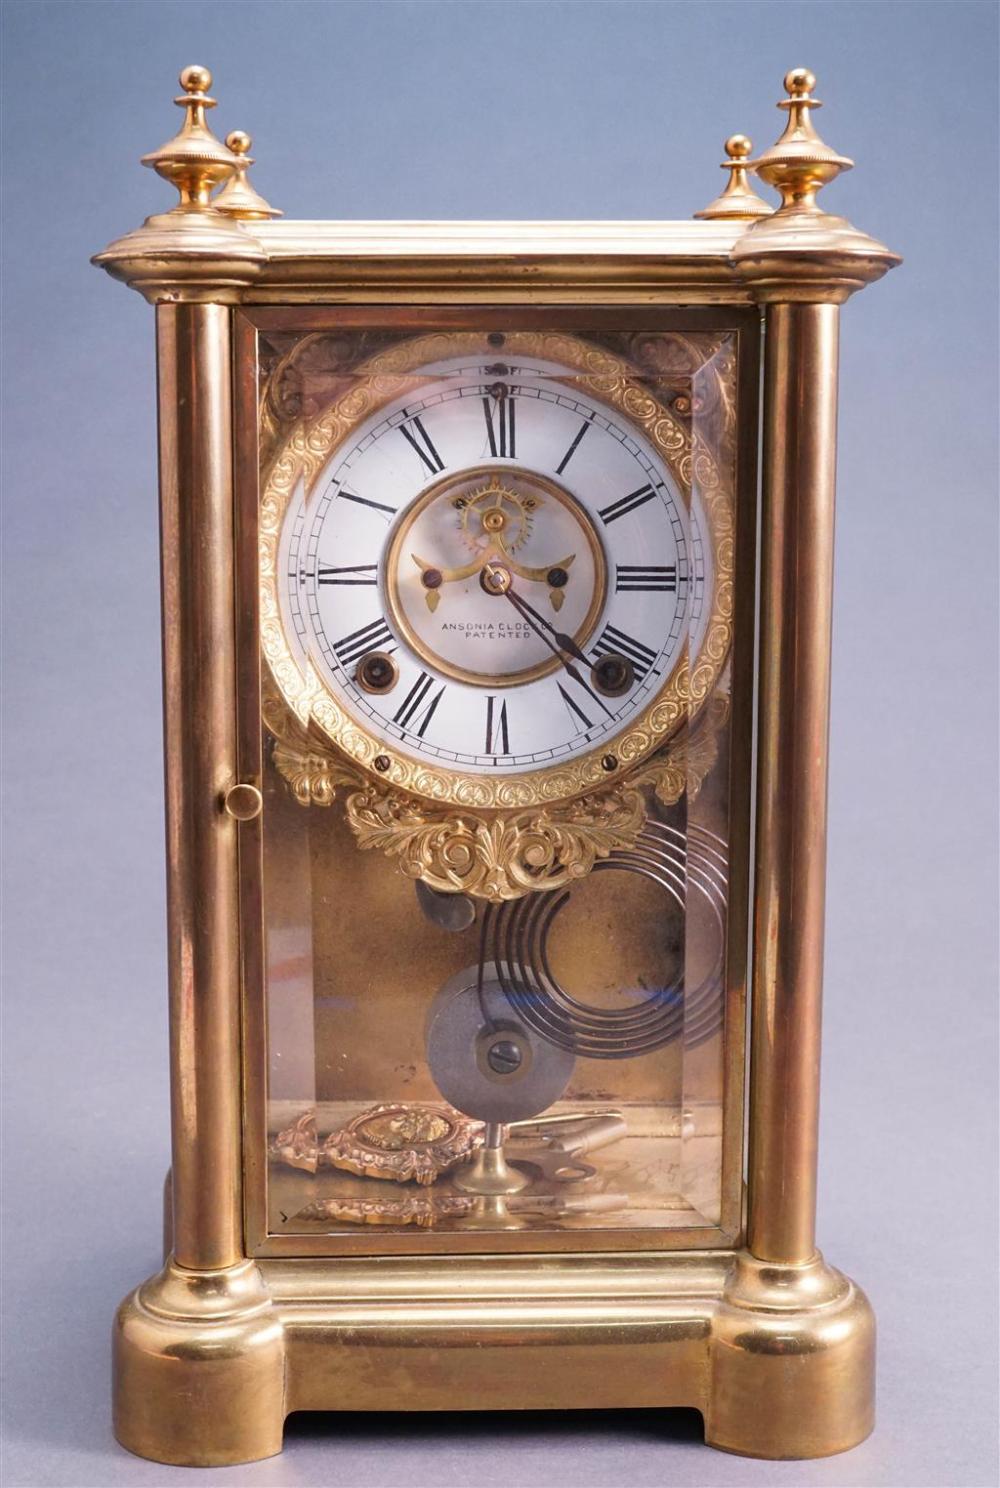 ANSONIA CLOCK CO CRYSTAL AND BRASS 8-DAY